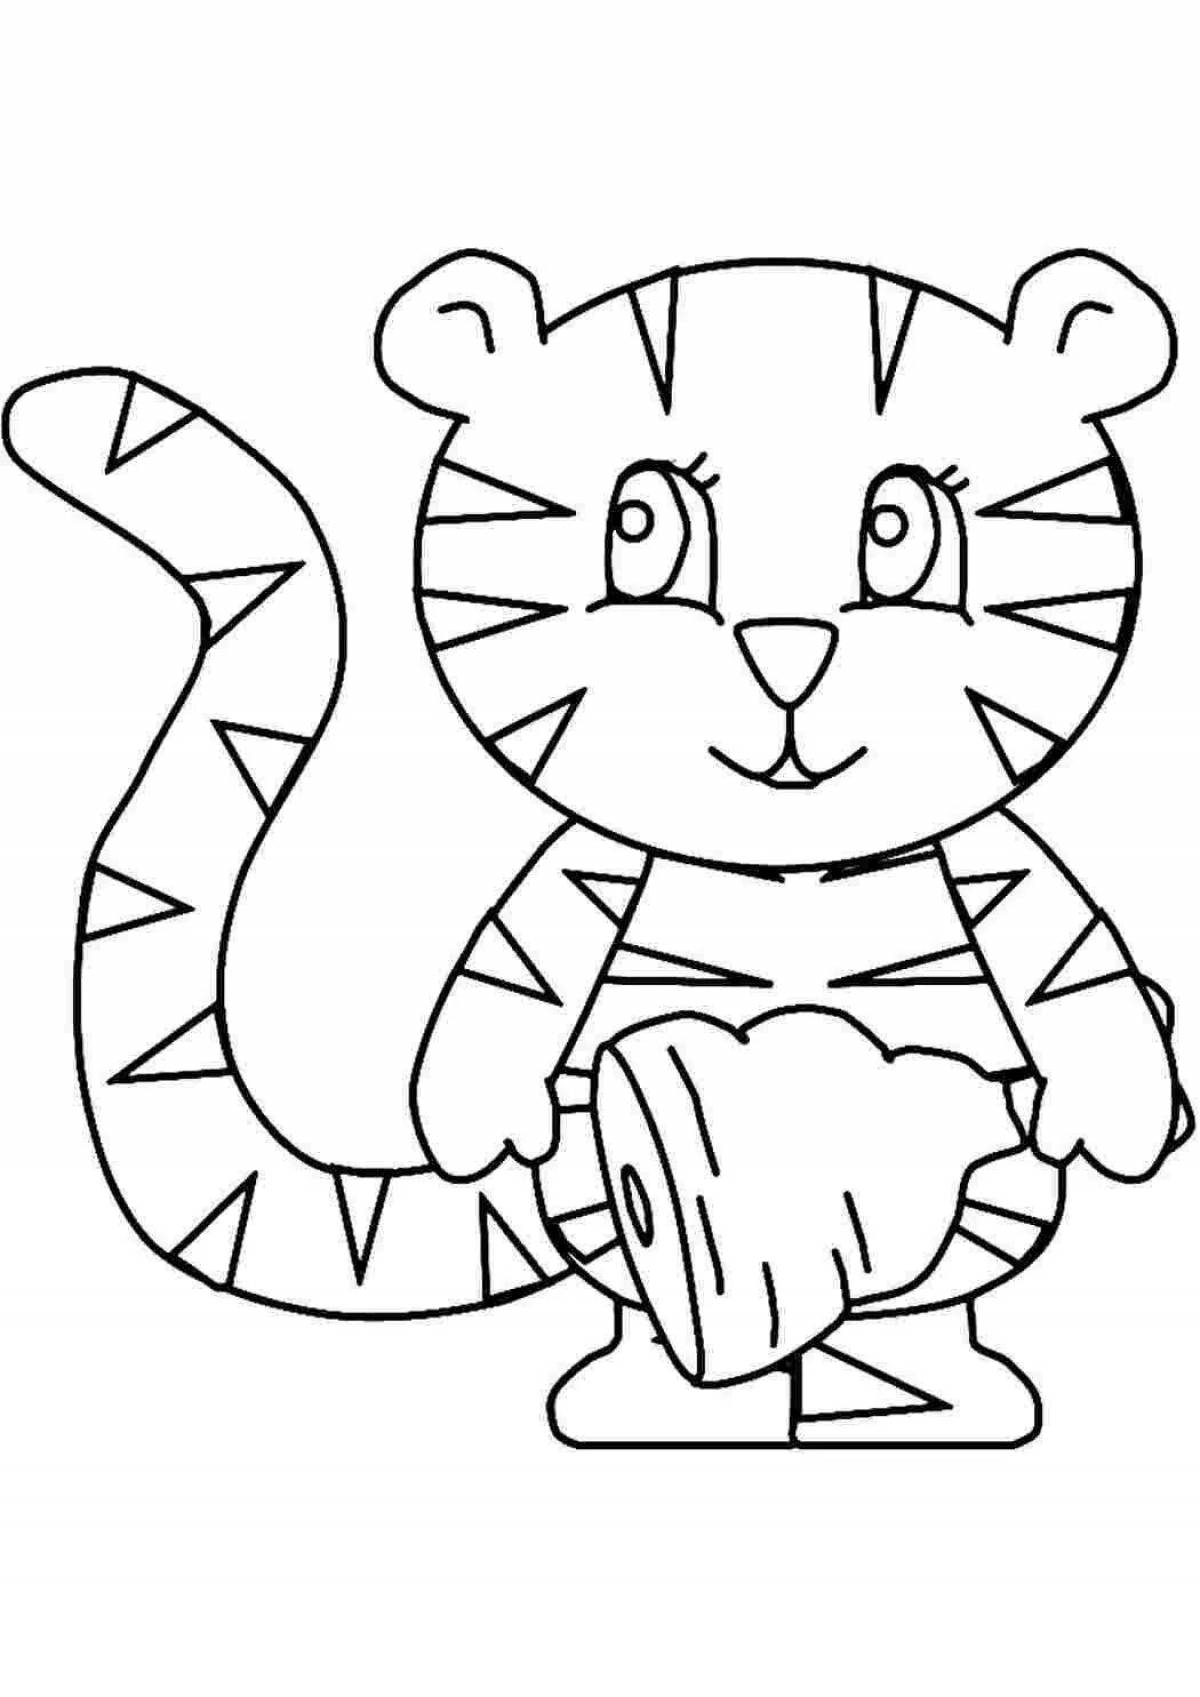 Amazing tiger coloring book for 3-4 year olds